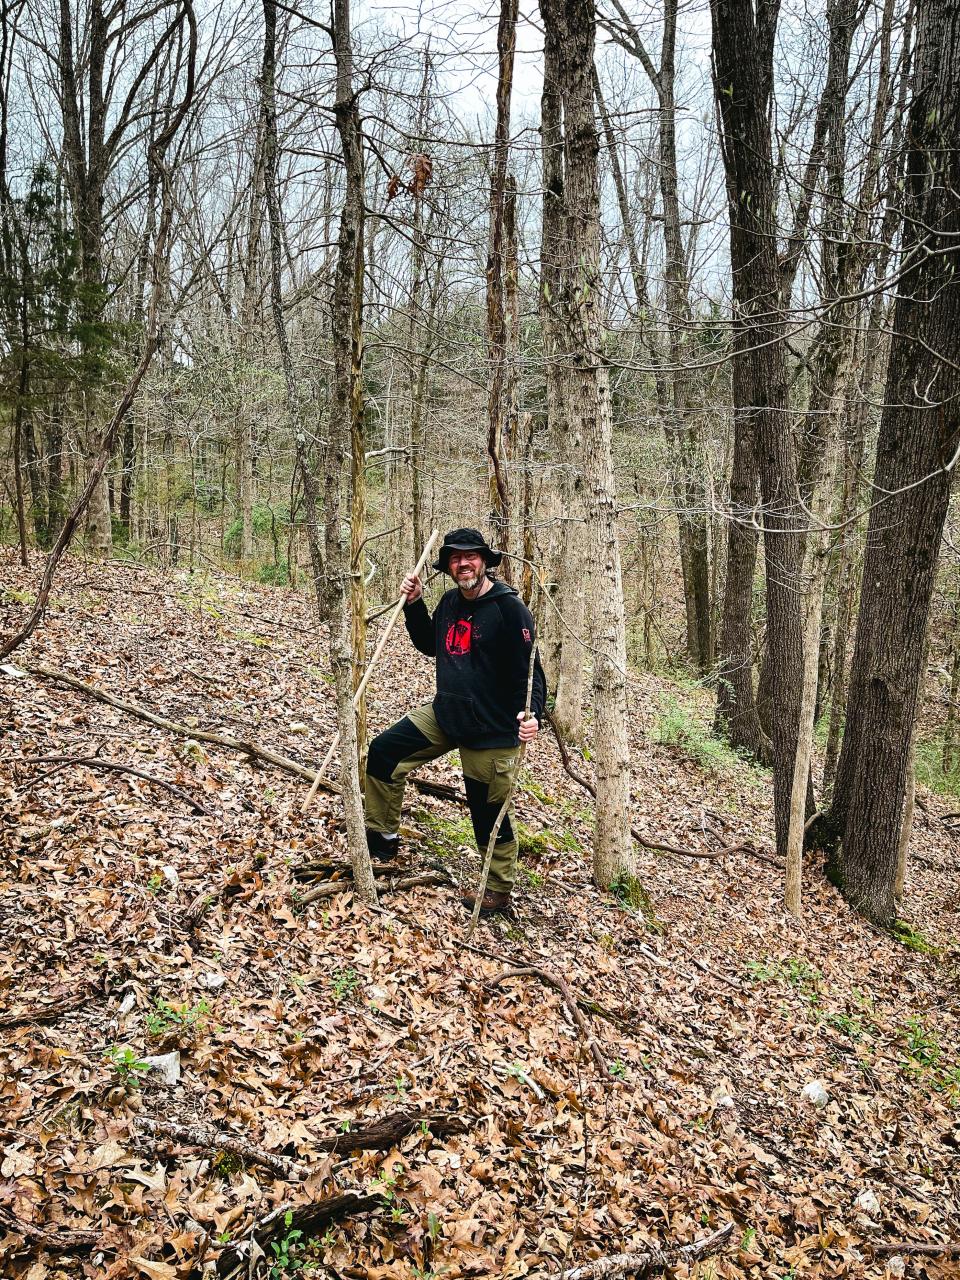 Trent Holloway stands on a hill while mushroom hunting.